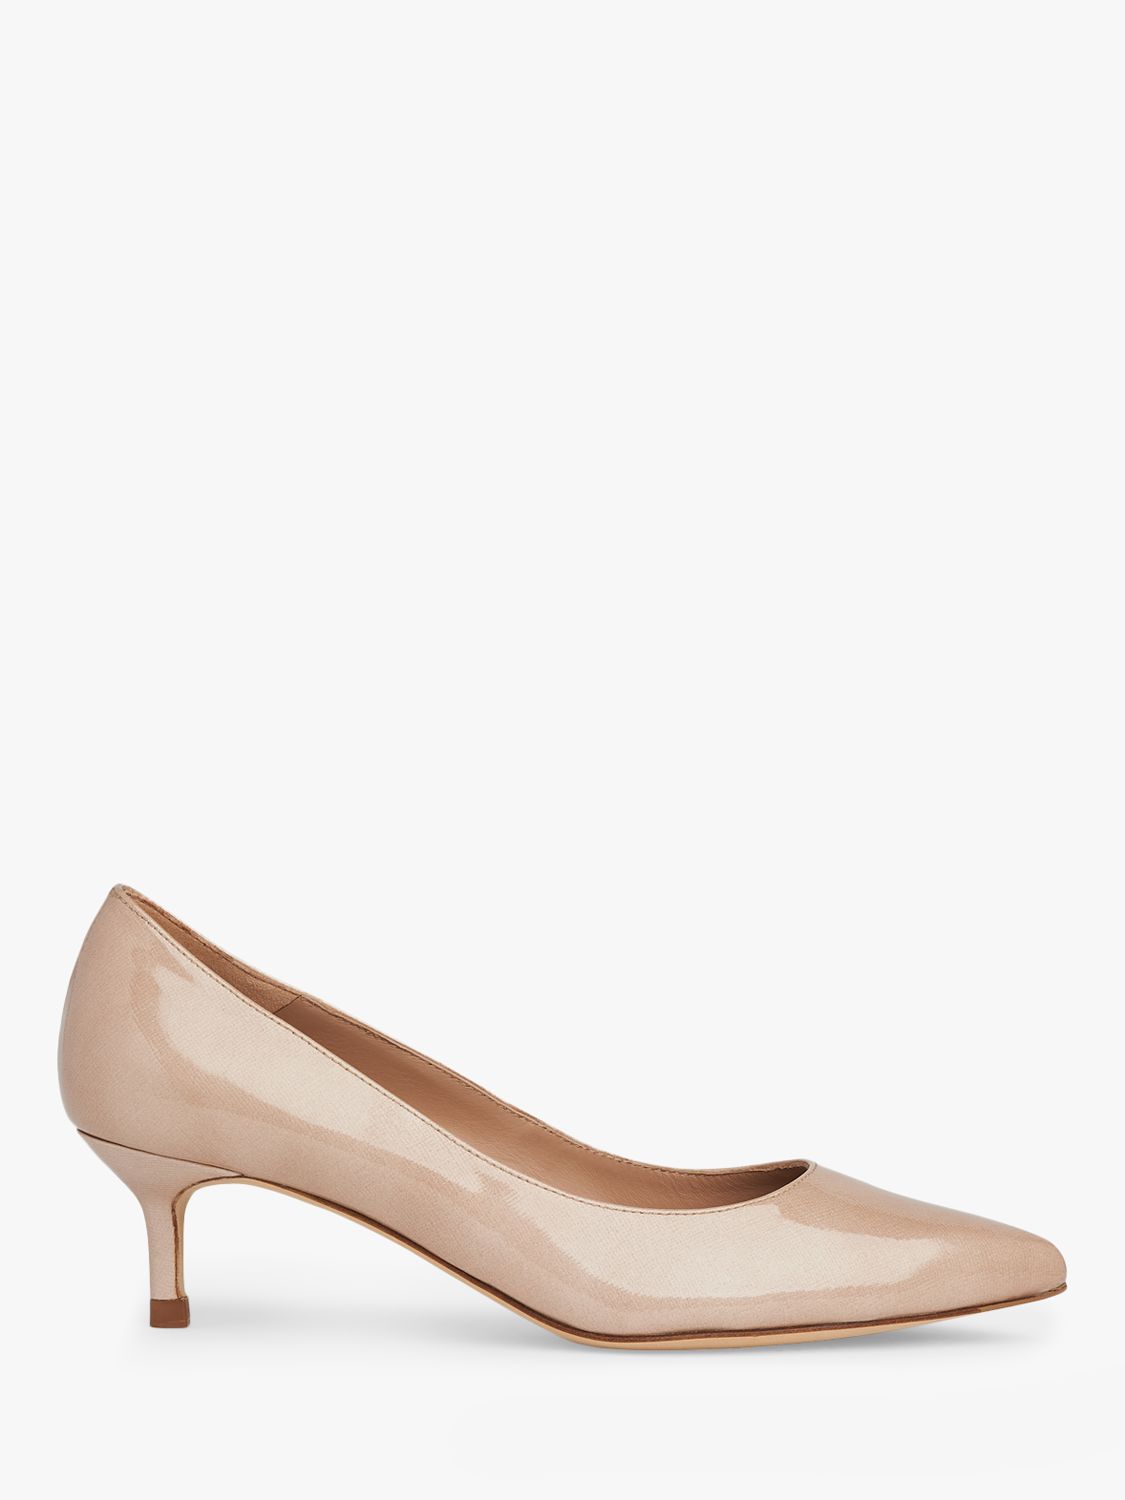 L.K.Bennett Audrey Crinkle Patent Pointed Toe Court Shoes, Nude Metallic